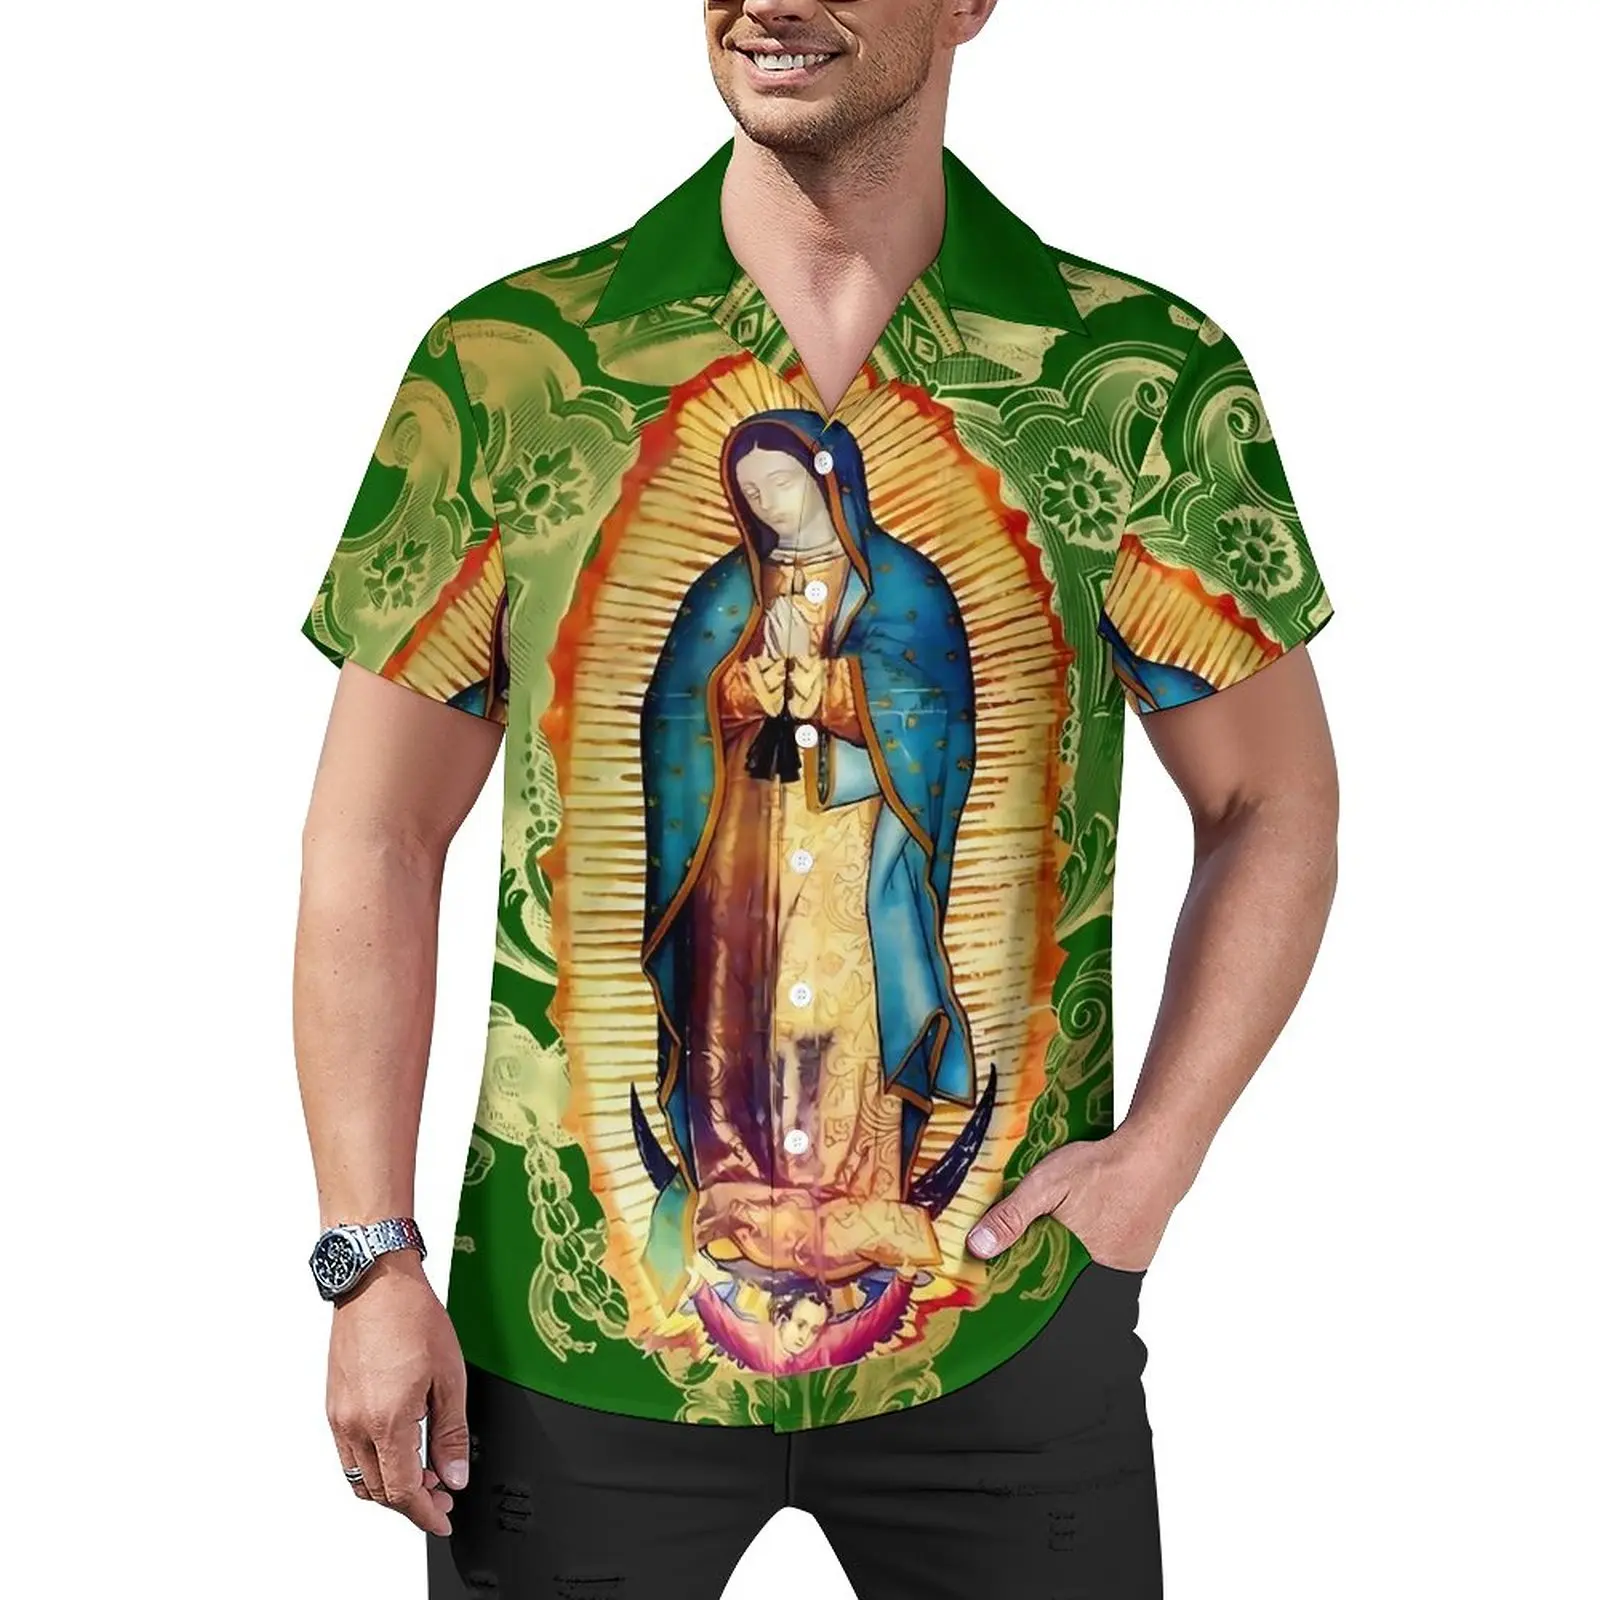 

Virgin Mary Mexico Beach Shirt Our Lady of Guadalupe Hawaii Casual Shirts Male Cool Blouses Short-Sleeve Print Clothes Plus Size